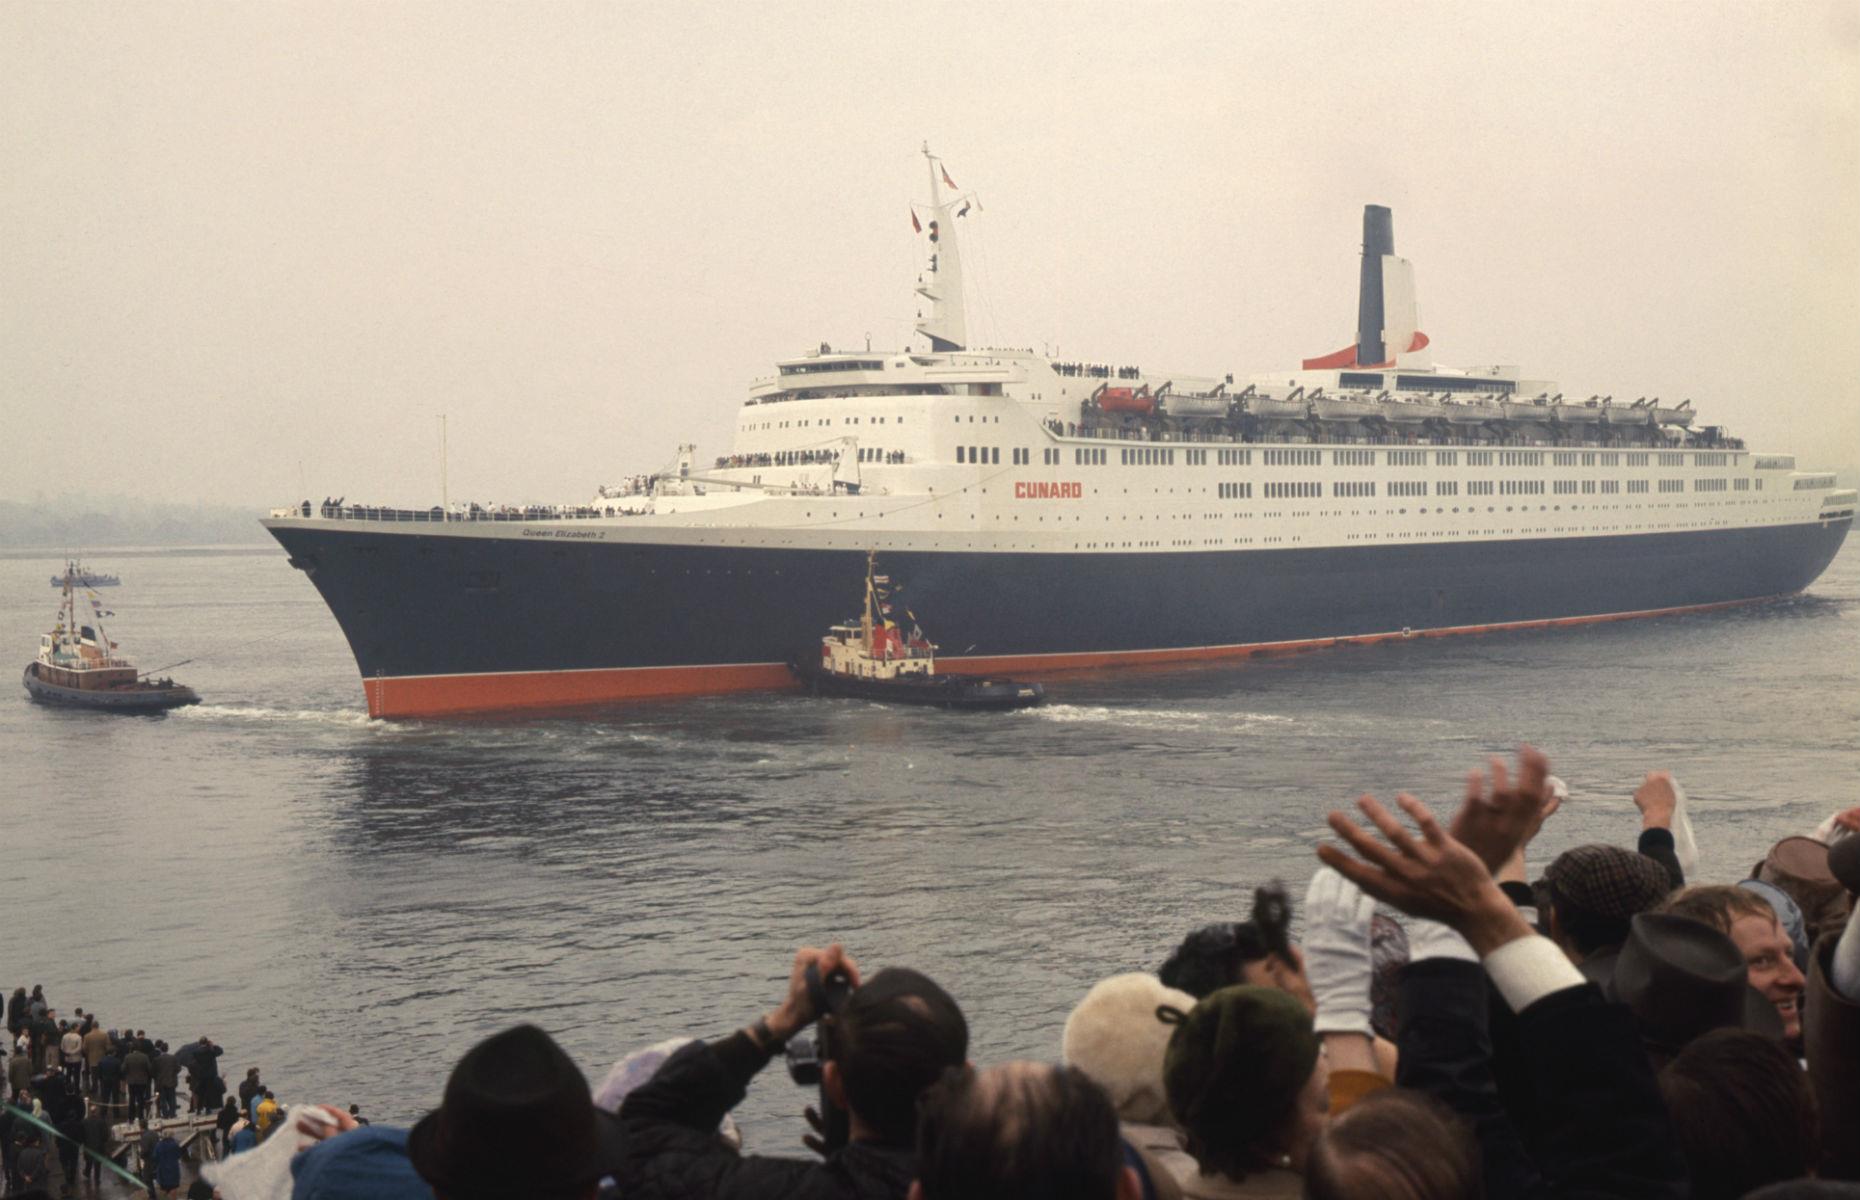 <p>Another iconic luxury liner built by Cunard, the 963-foot-long Queen Elizabeth 2 (or QE2 as it's better known) set sail on her maiden voyage from Southampton to New York in May 1969, with crowds of well-wishers (pictured) waving her off. In her 39 years at sea, the QE2 completed 806 Atlantic crossings and 25 trips around the world, racking up millions of nautical miles as a cruise liner and, for a brief stint, a troopship in the Falklands War. </p>